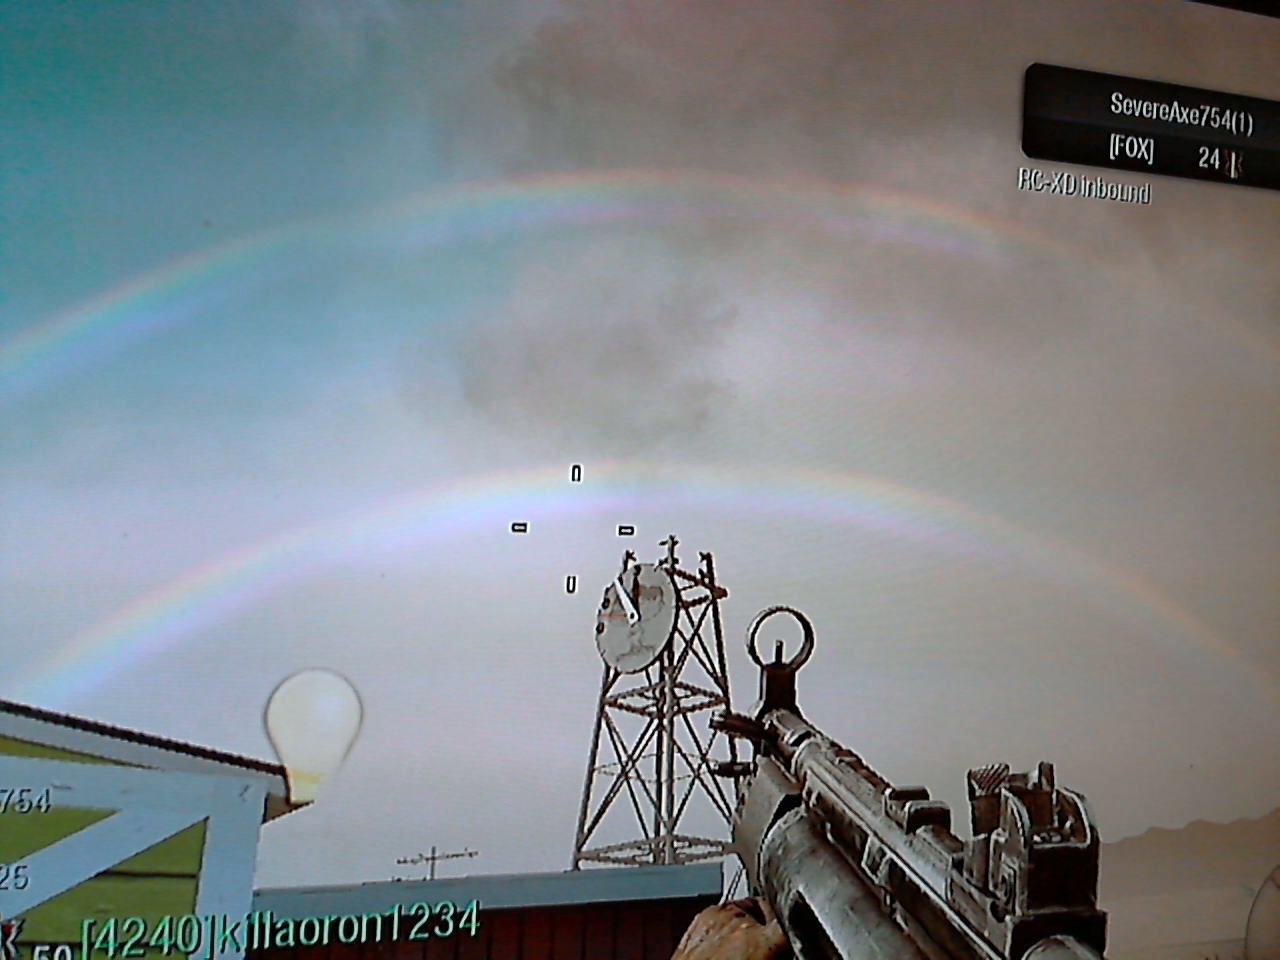 a full on double rainbow......  i took this while playing black ops.